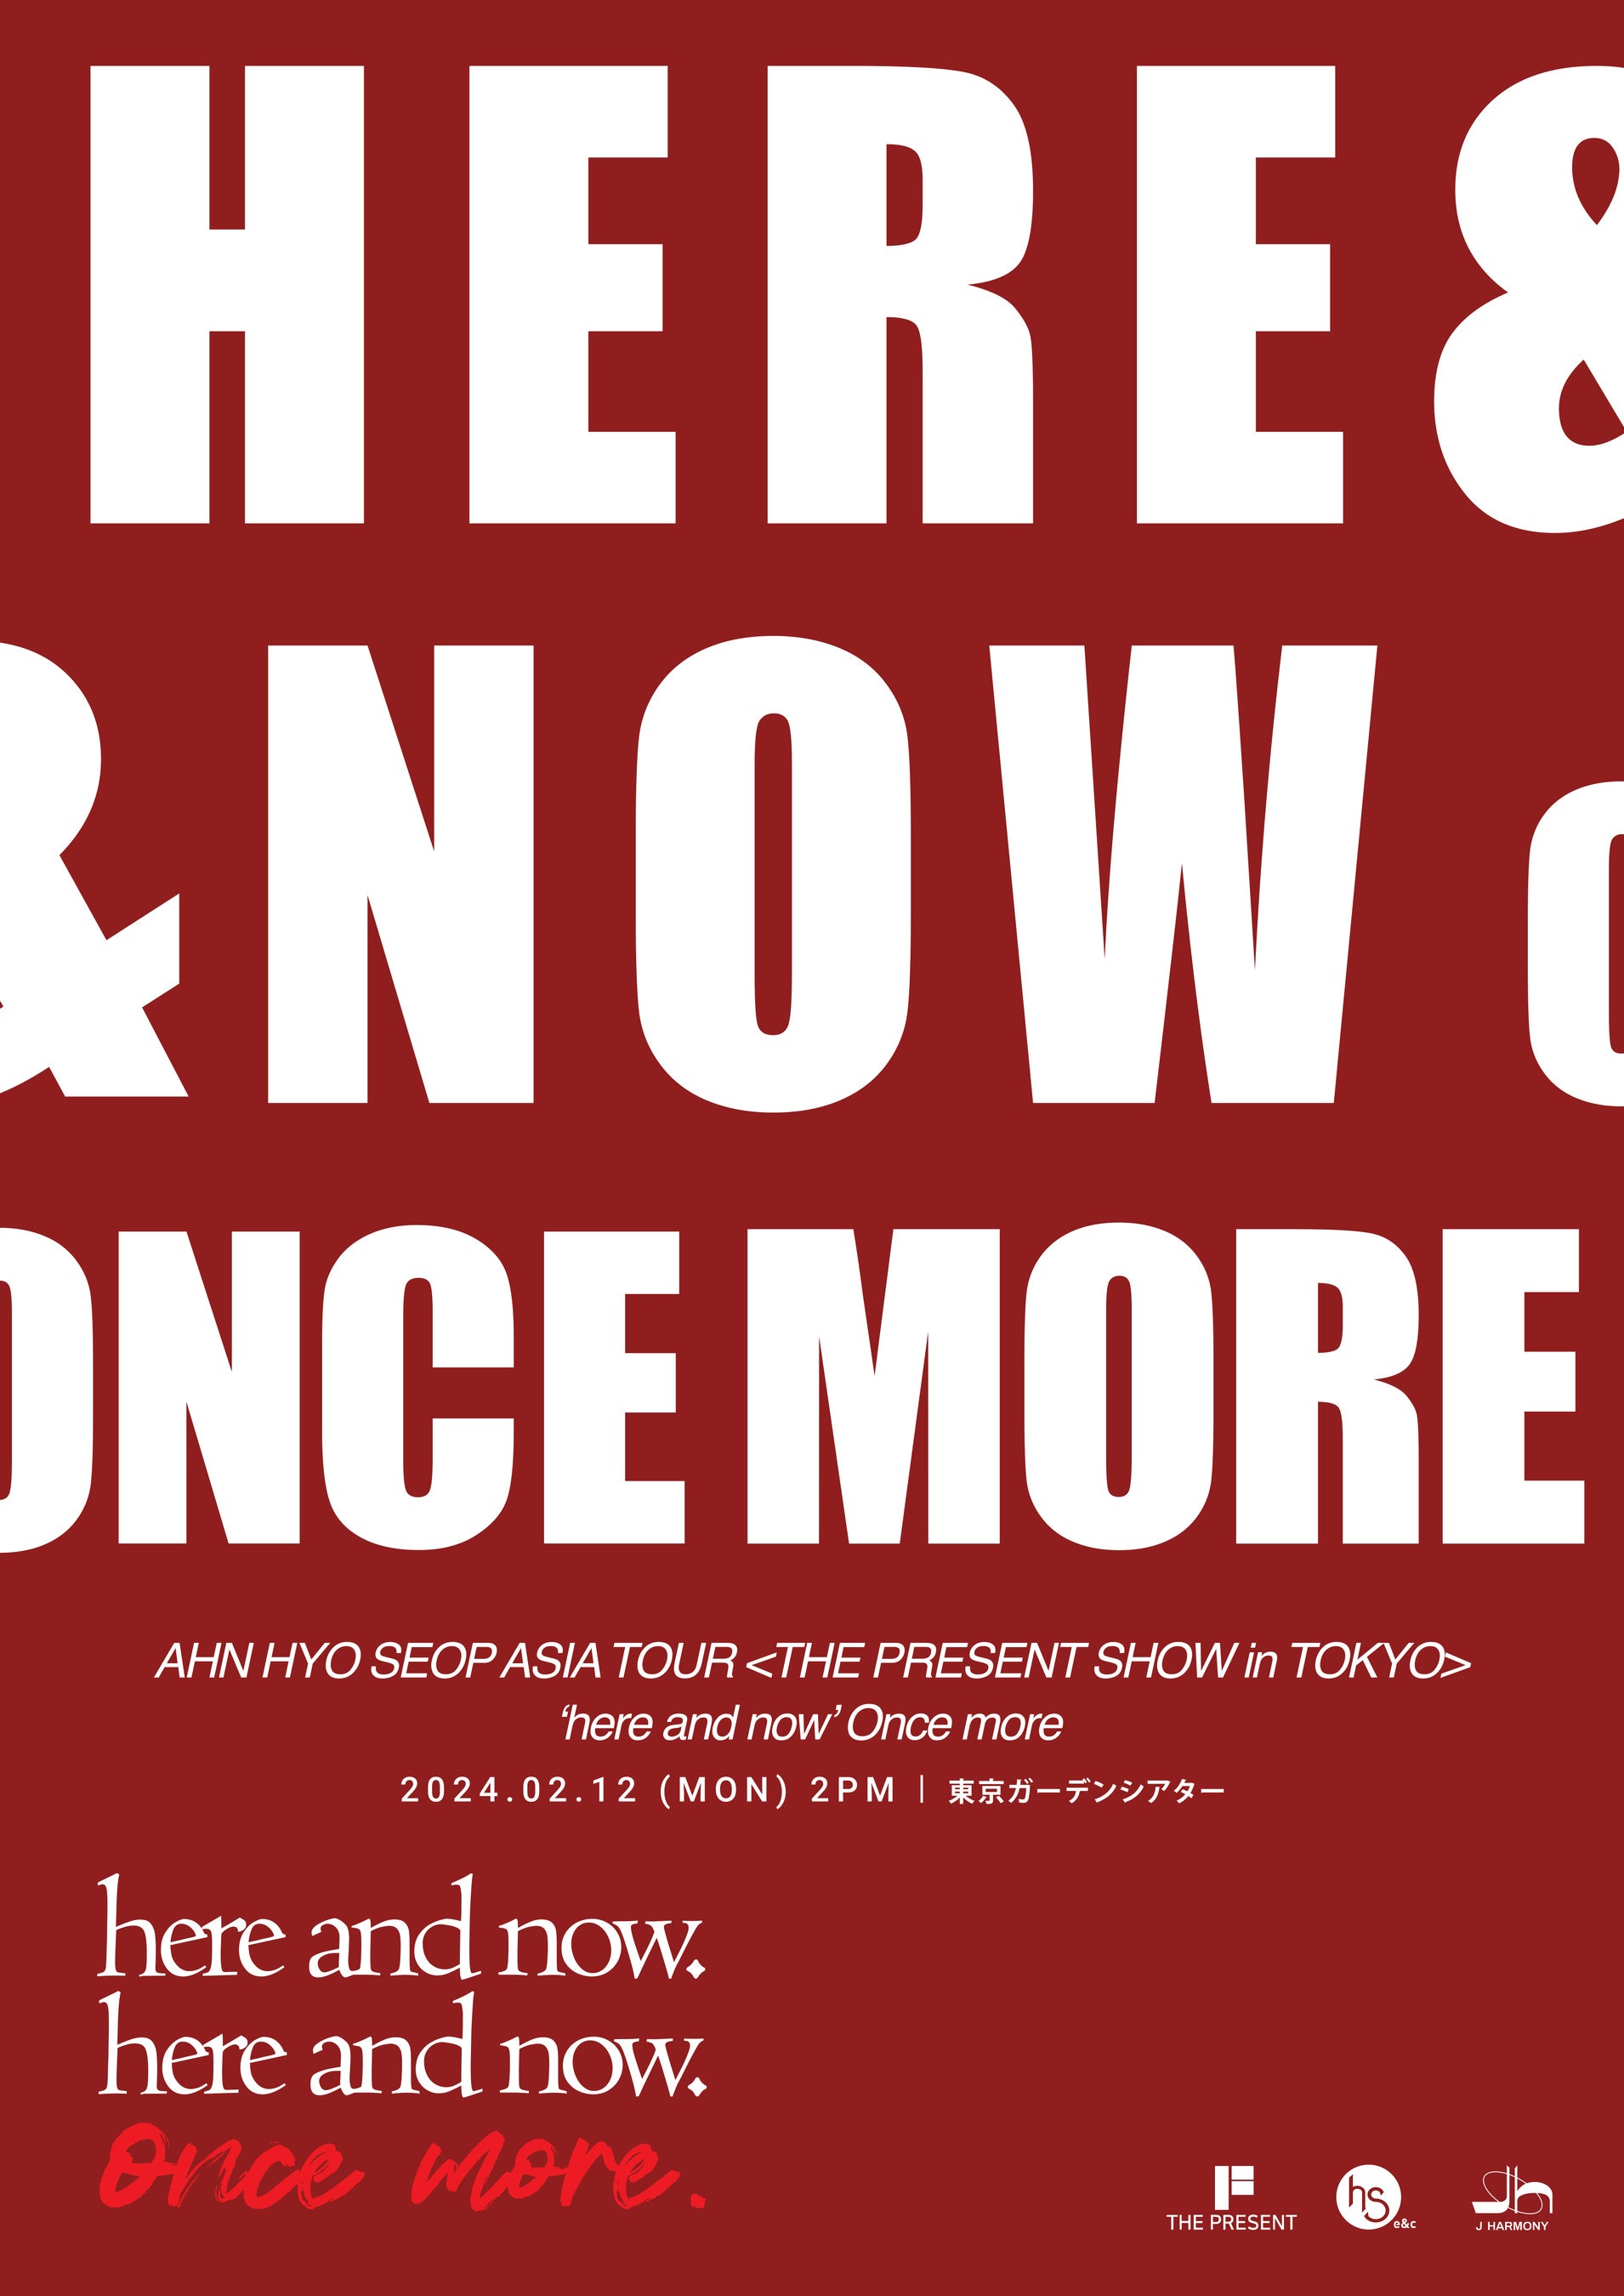 AHN HYO SEOP ASIA TOURTHE PRESENT SHOW in TOKYO ehere and nowf Once more